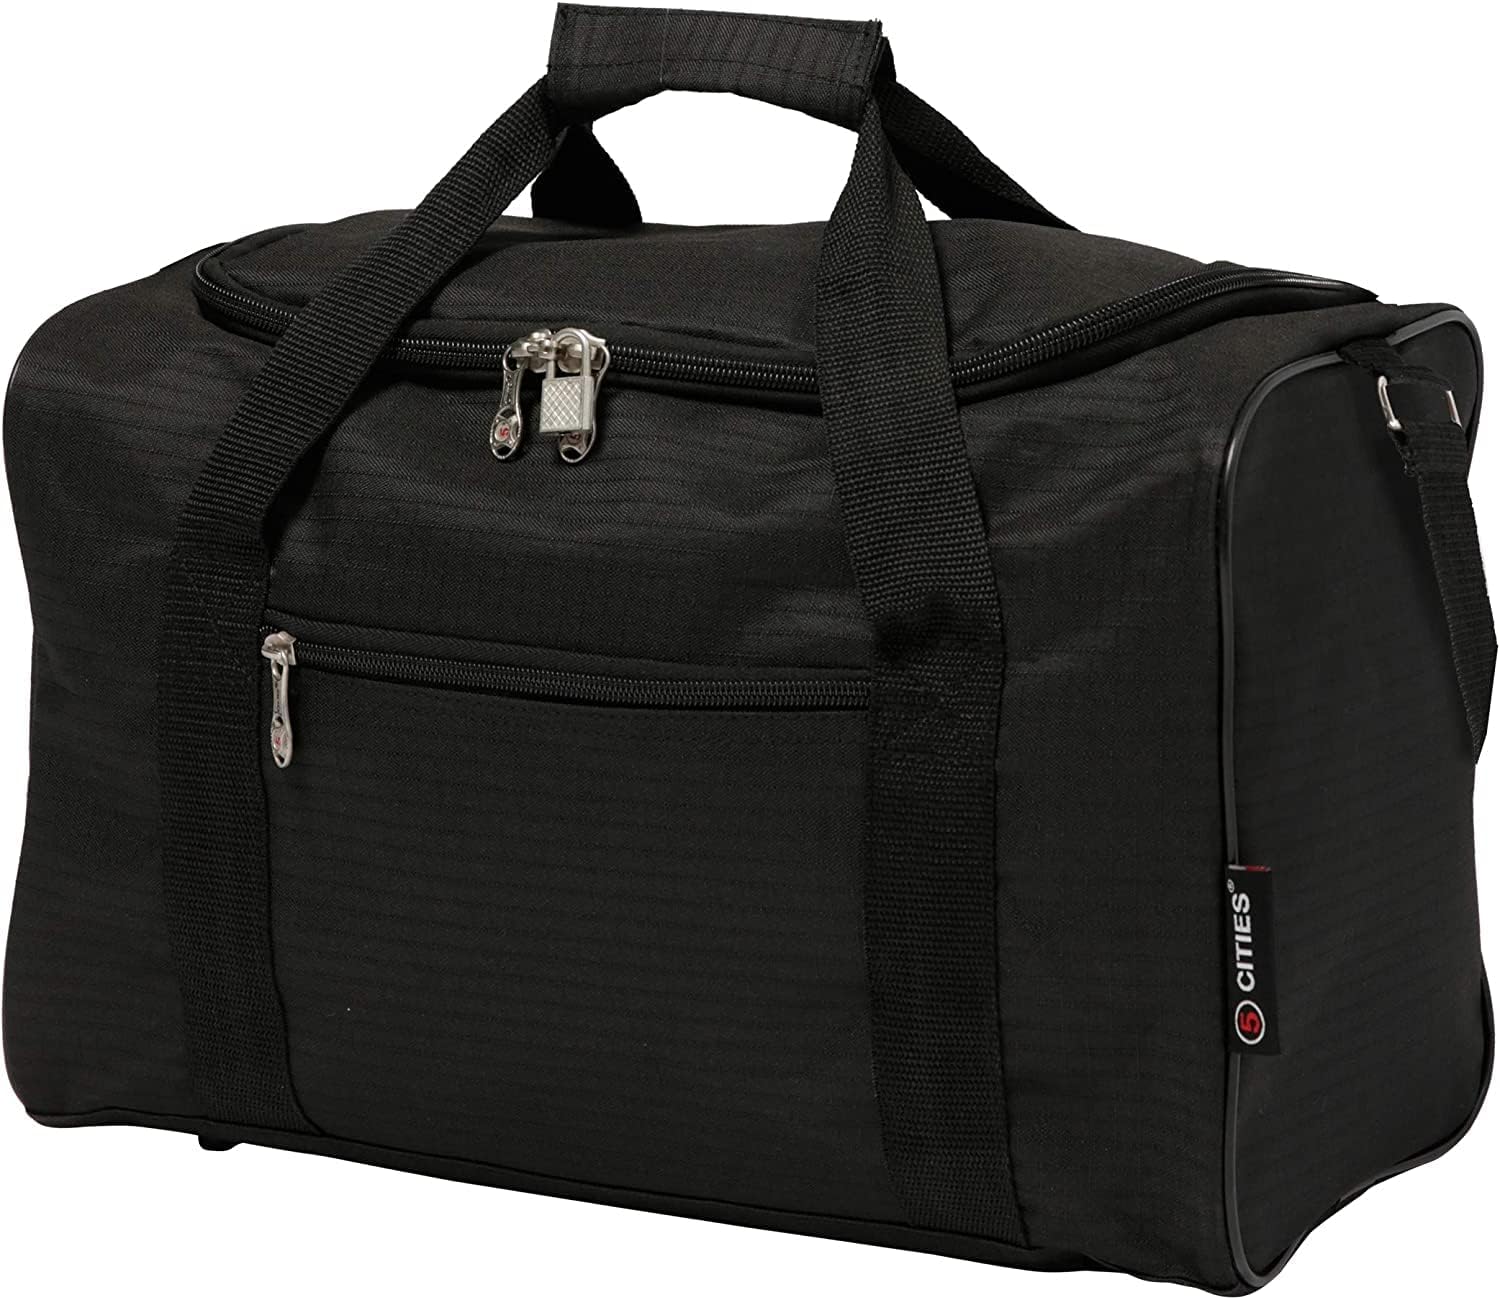 5 Cities 40x20x25 Ryanair Maximum Sized Travel Carry On Under Seat Cabin Holdall Lightweight – Take The Max on Board! with 2 Year Warranty (Black)